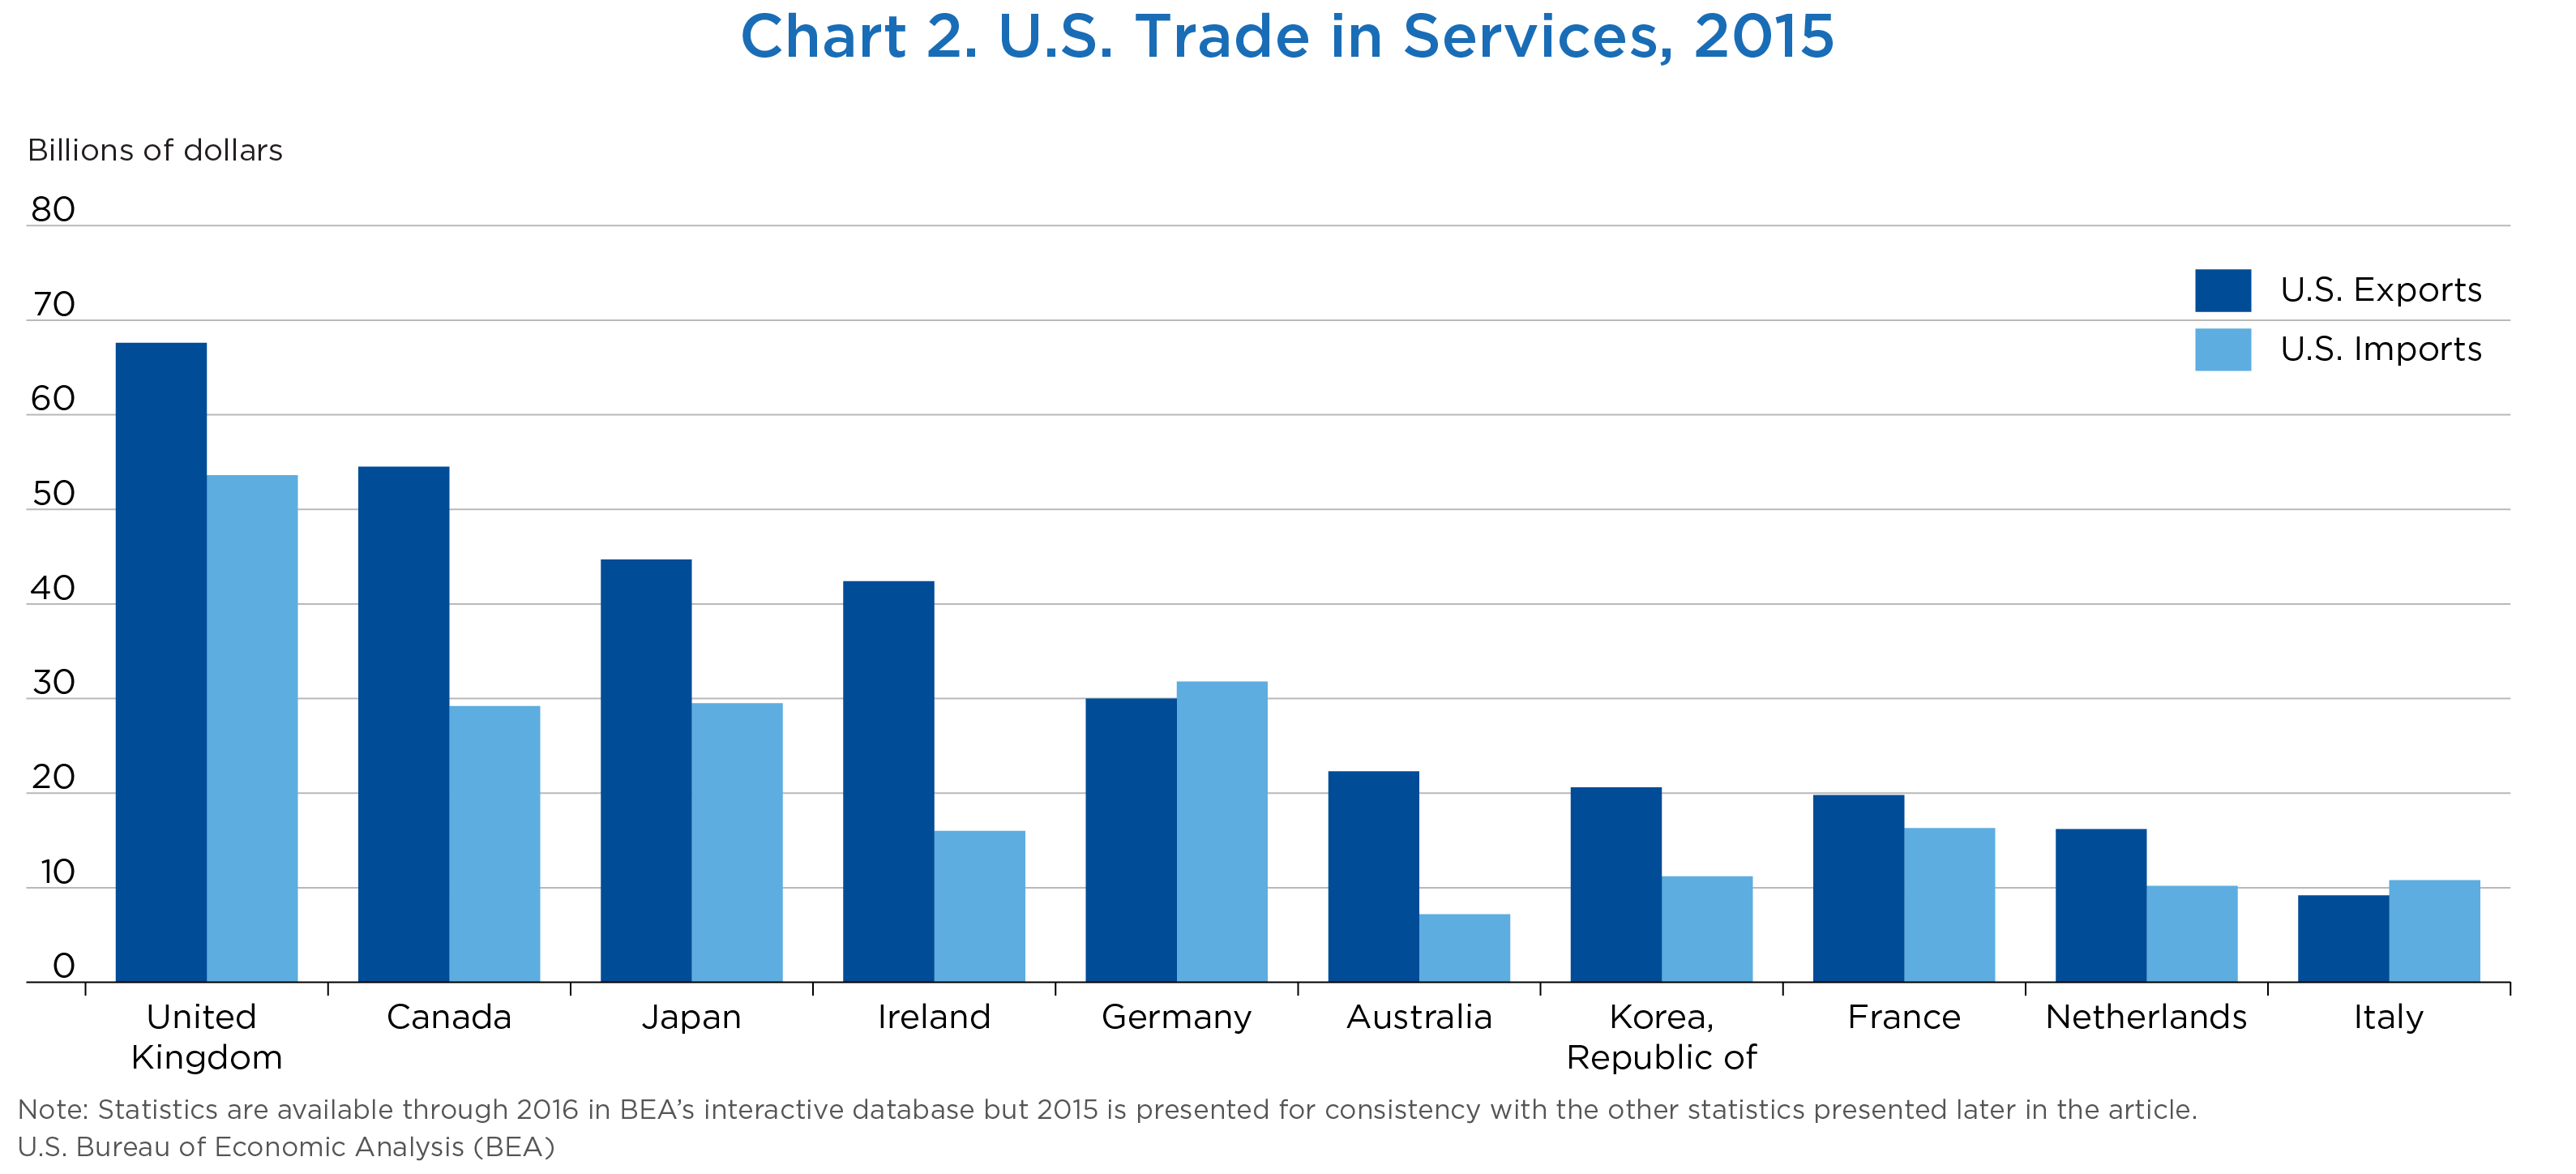 Chart 2. U.S. Trade in Services, 2015, Bar Chart